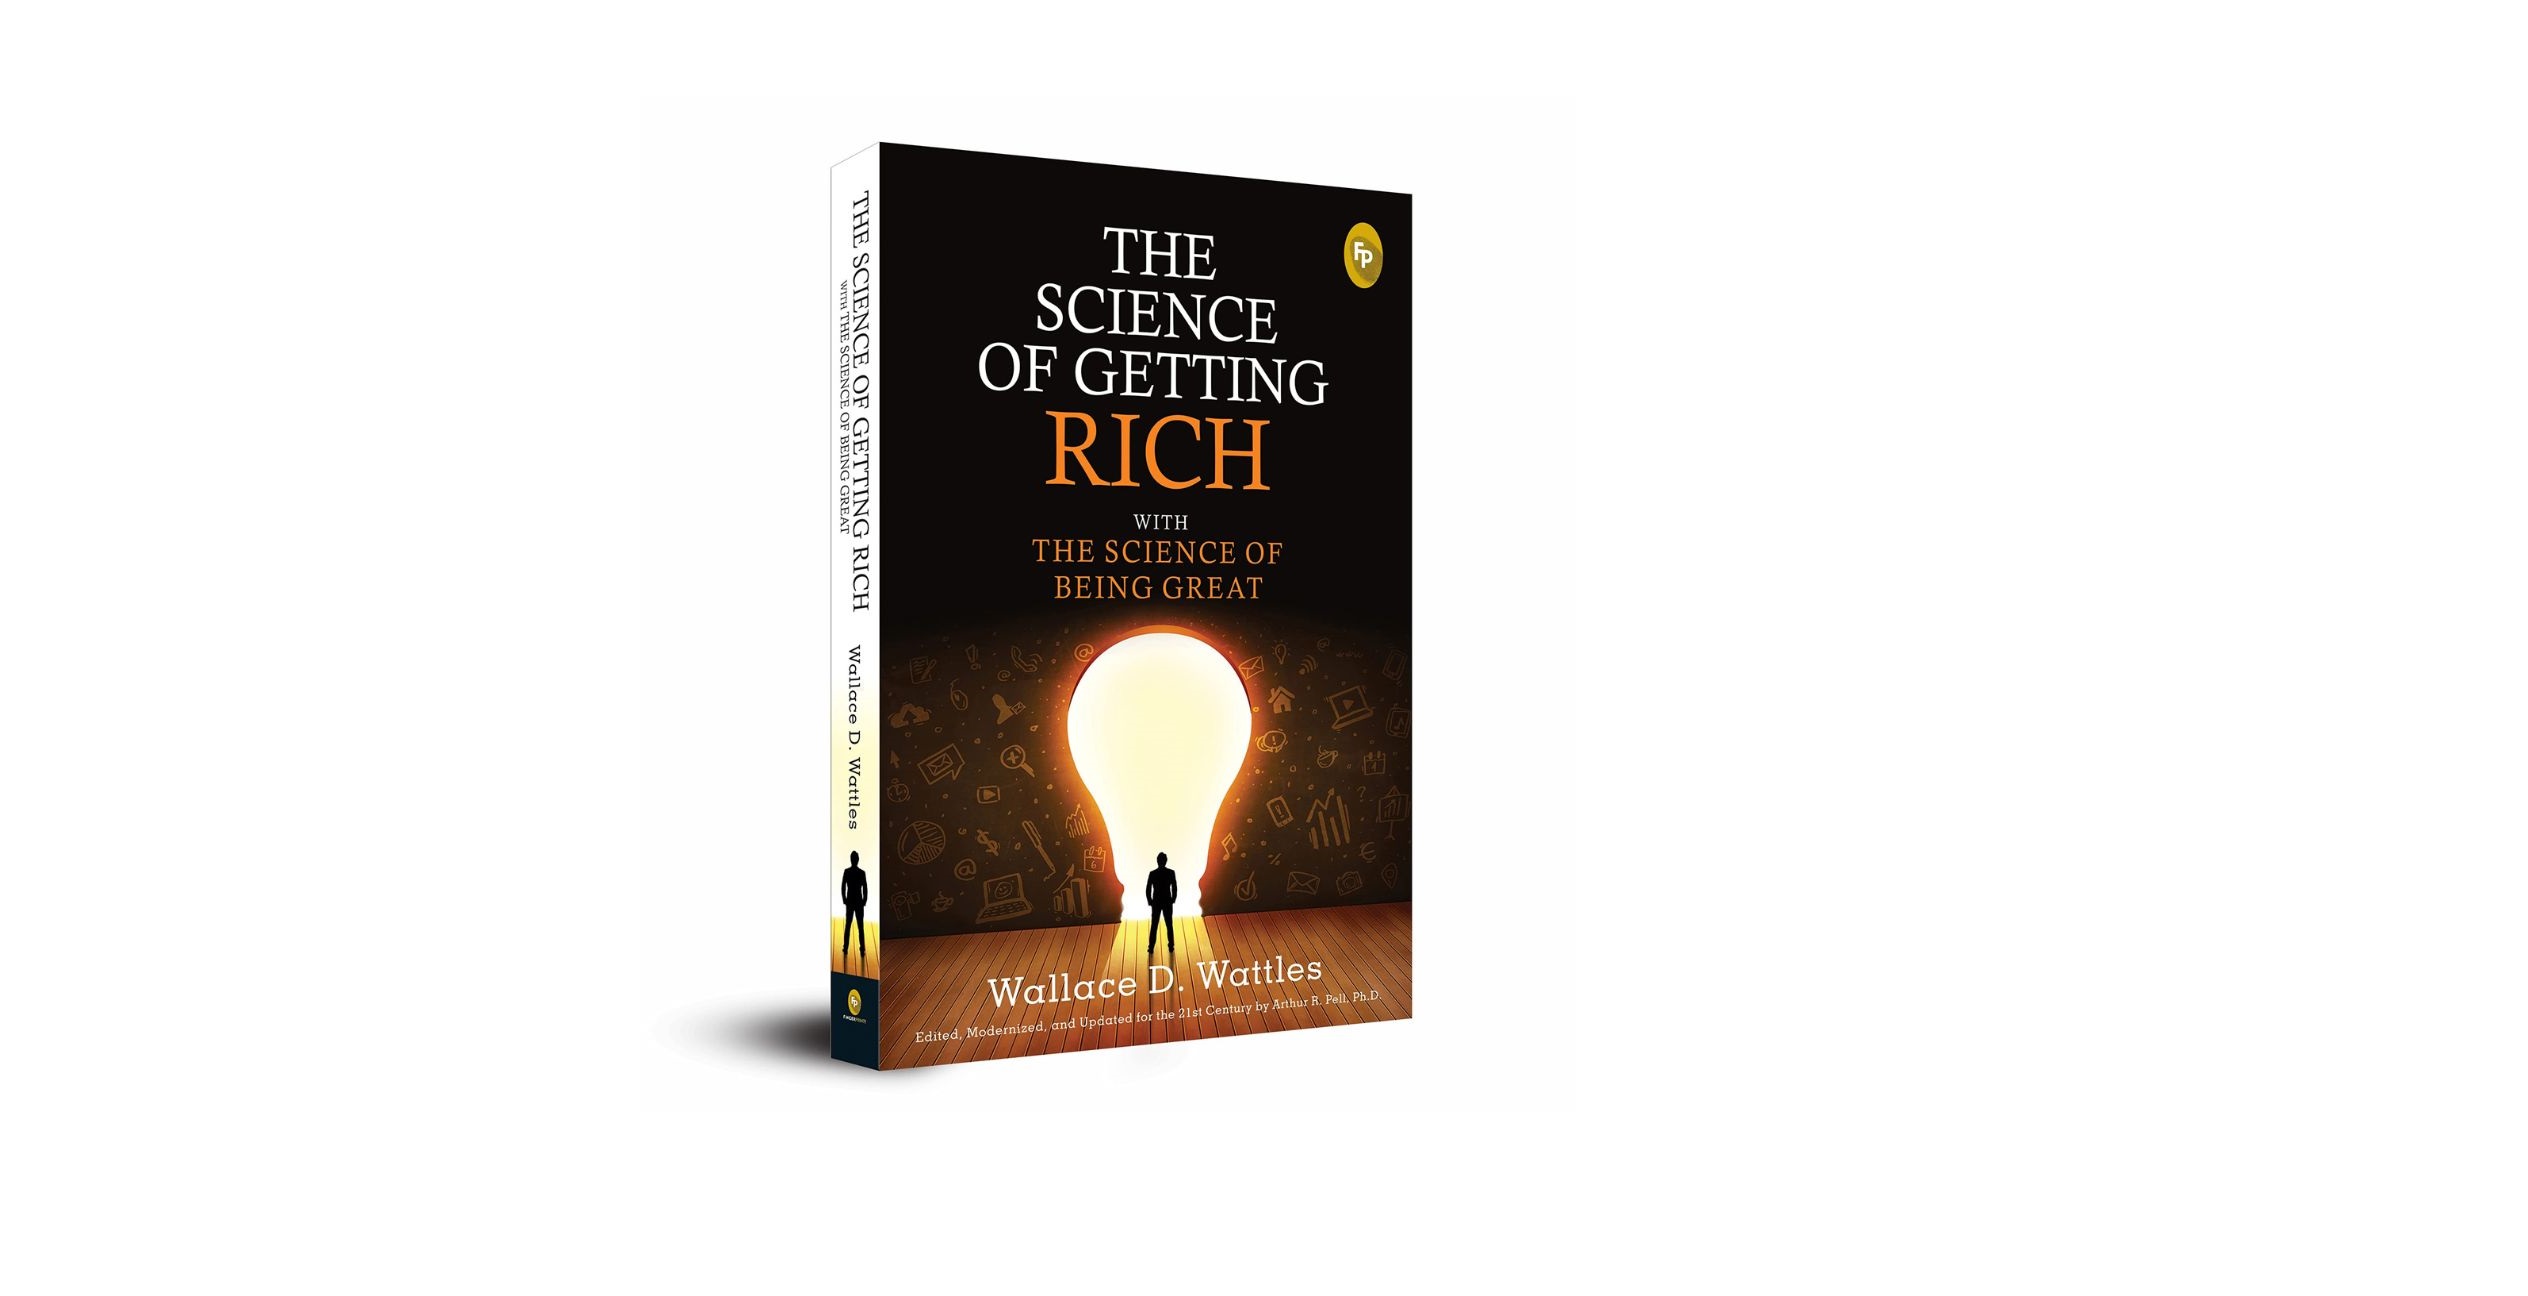 The Science of getting rich Key Points by Wallace D. Wattles